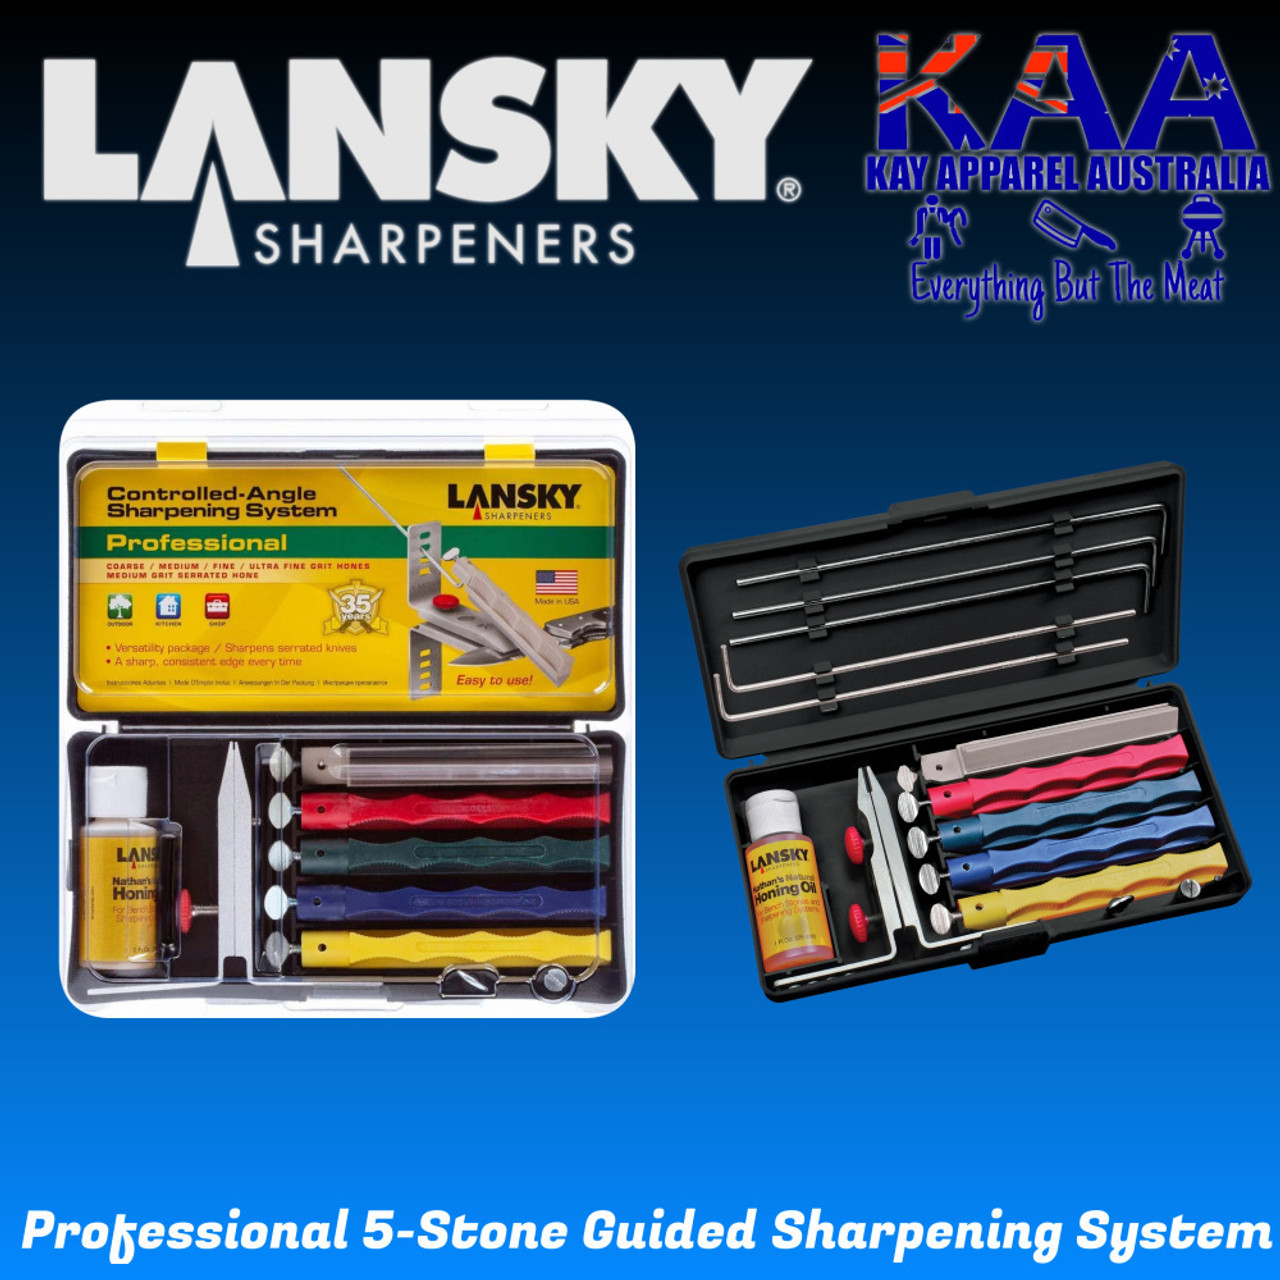 Lansky Controlled-Angle Sharpening System Review 